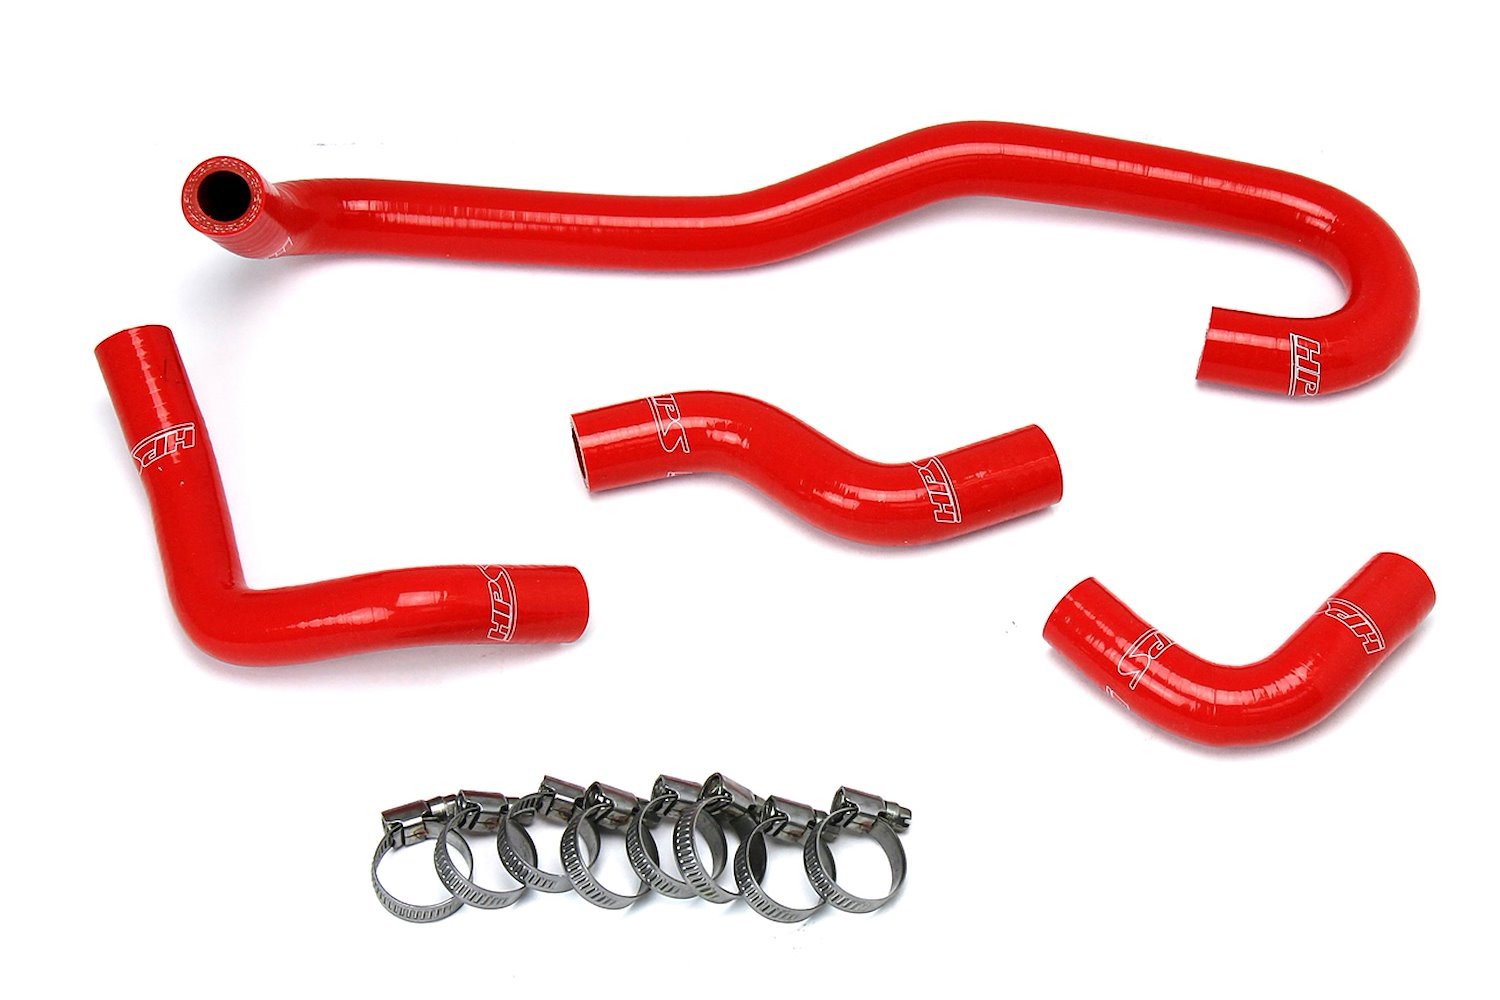 57-1655-RED Heater Hose Kit, High-Temp 3-Ply Reinforced Silicone, Replace OEM Rubber Heater Coolant Hoses